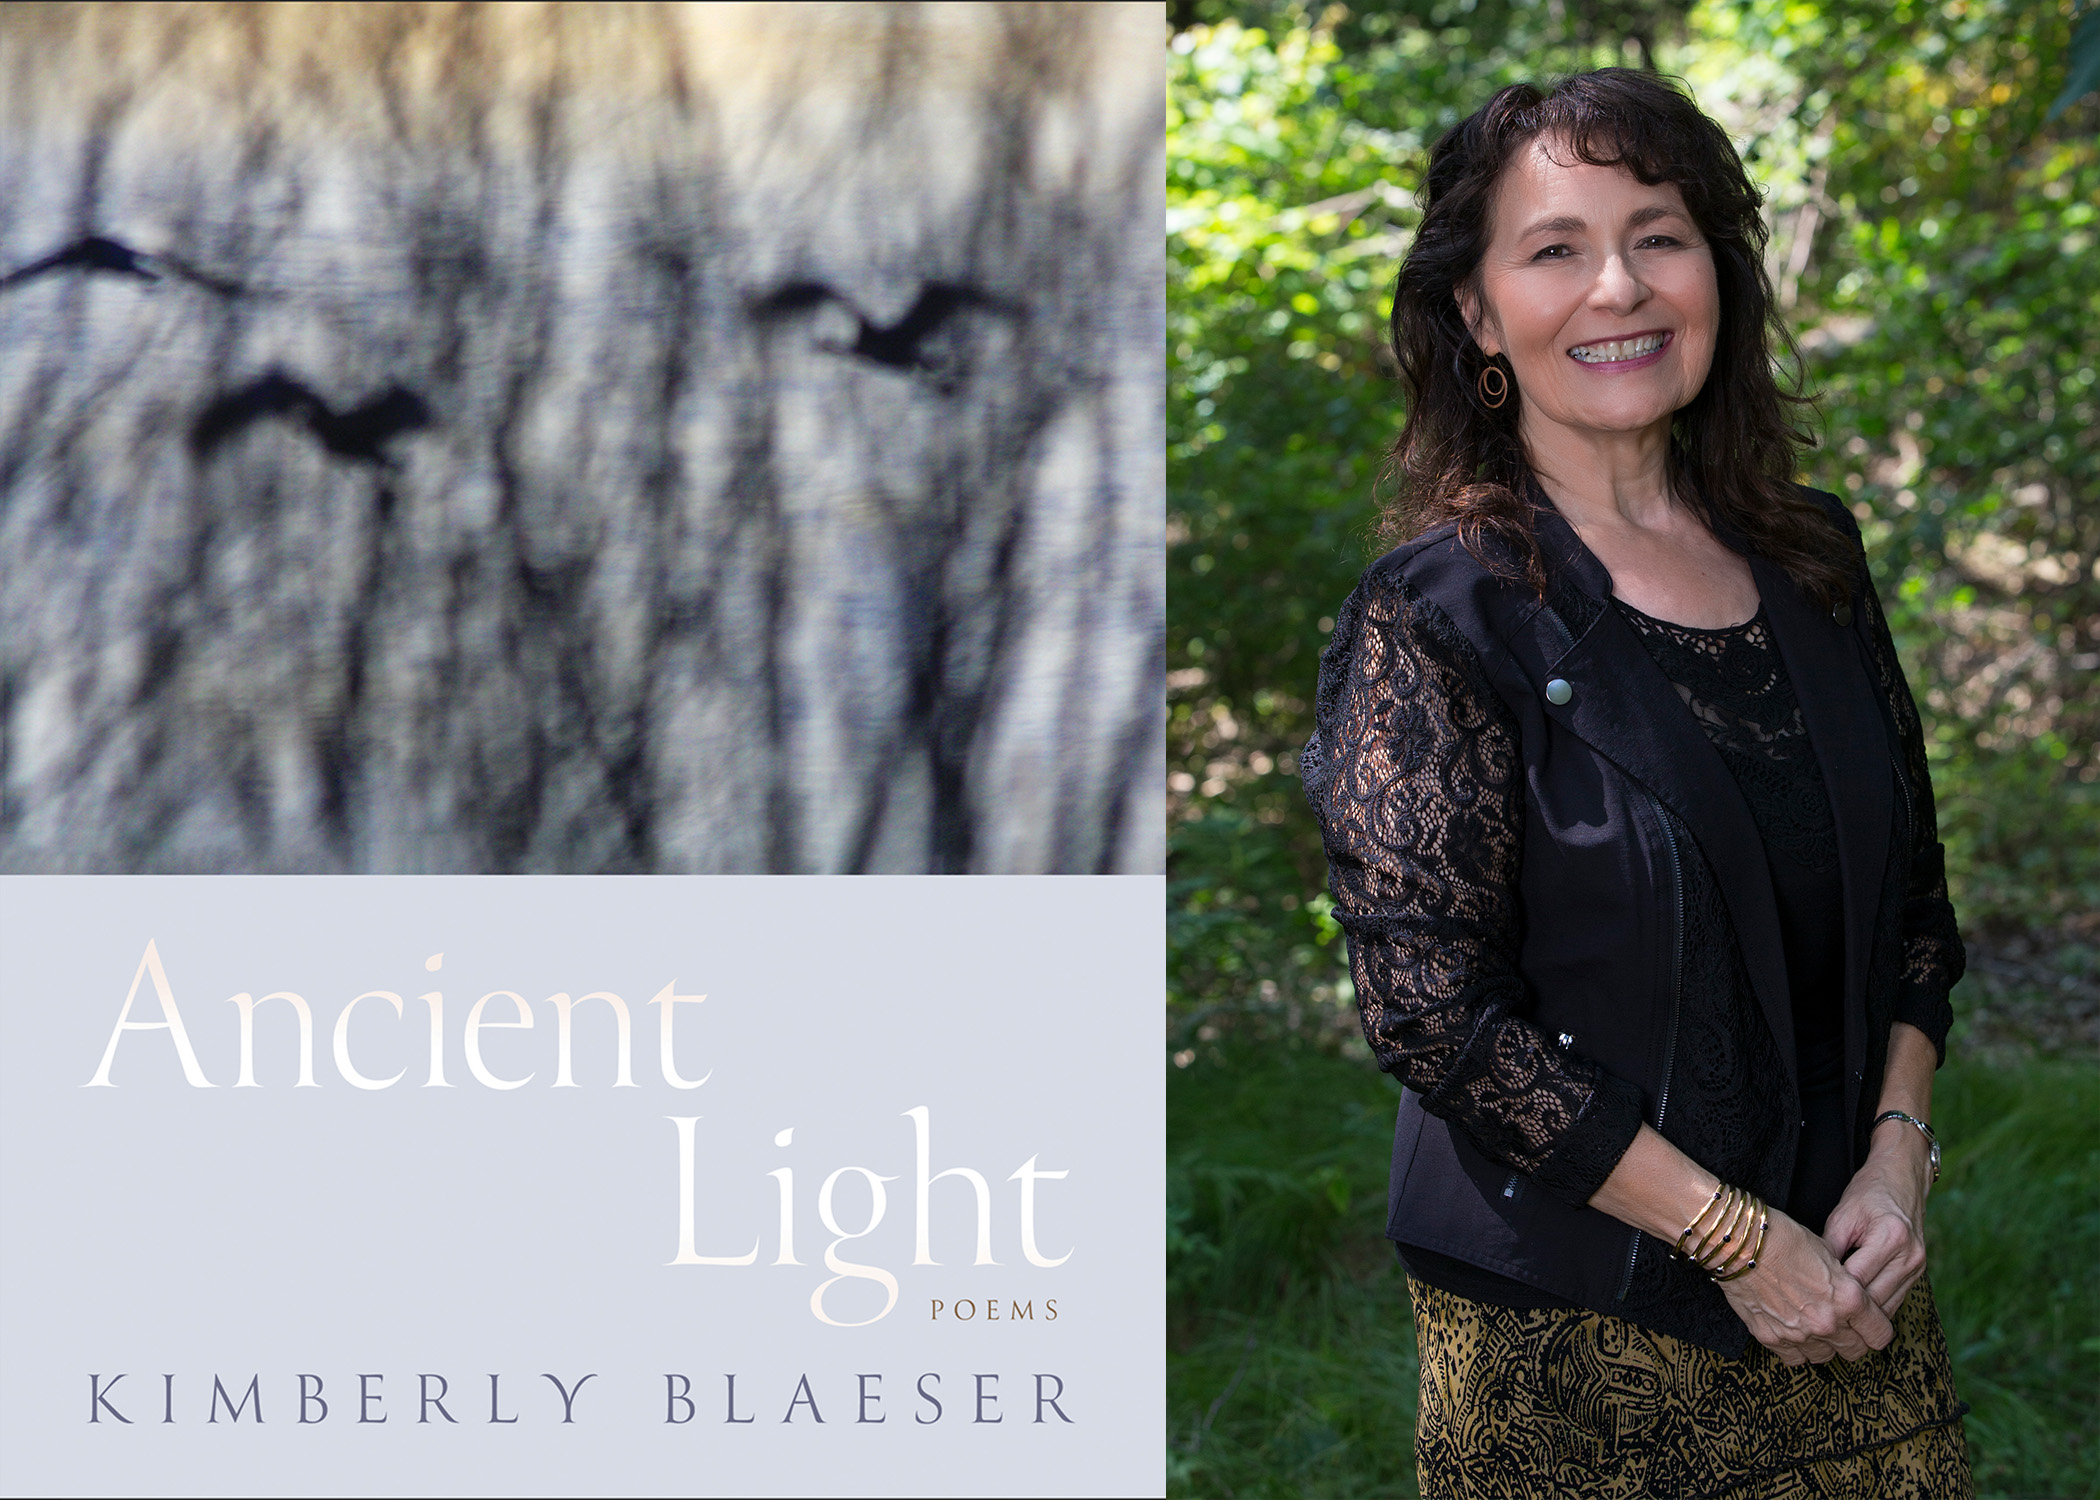 Book cover for Ancient Light Poems, and photo of author Kimberly Blaeser